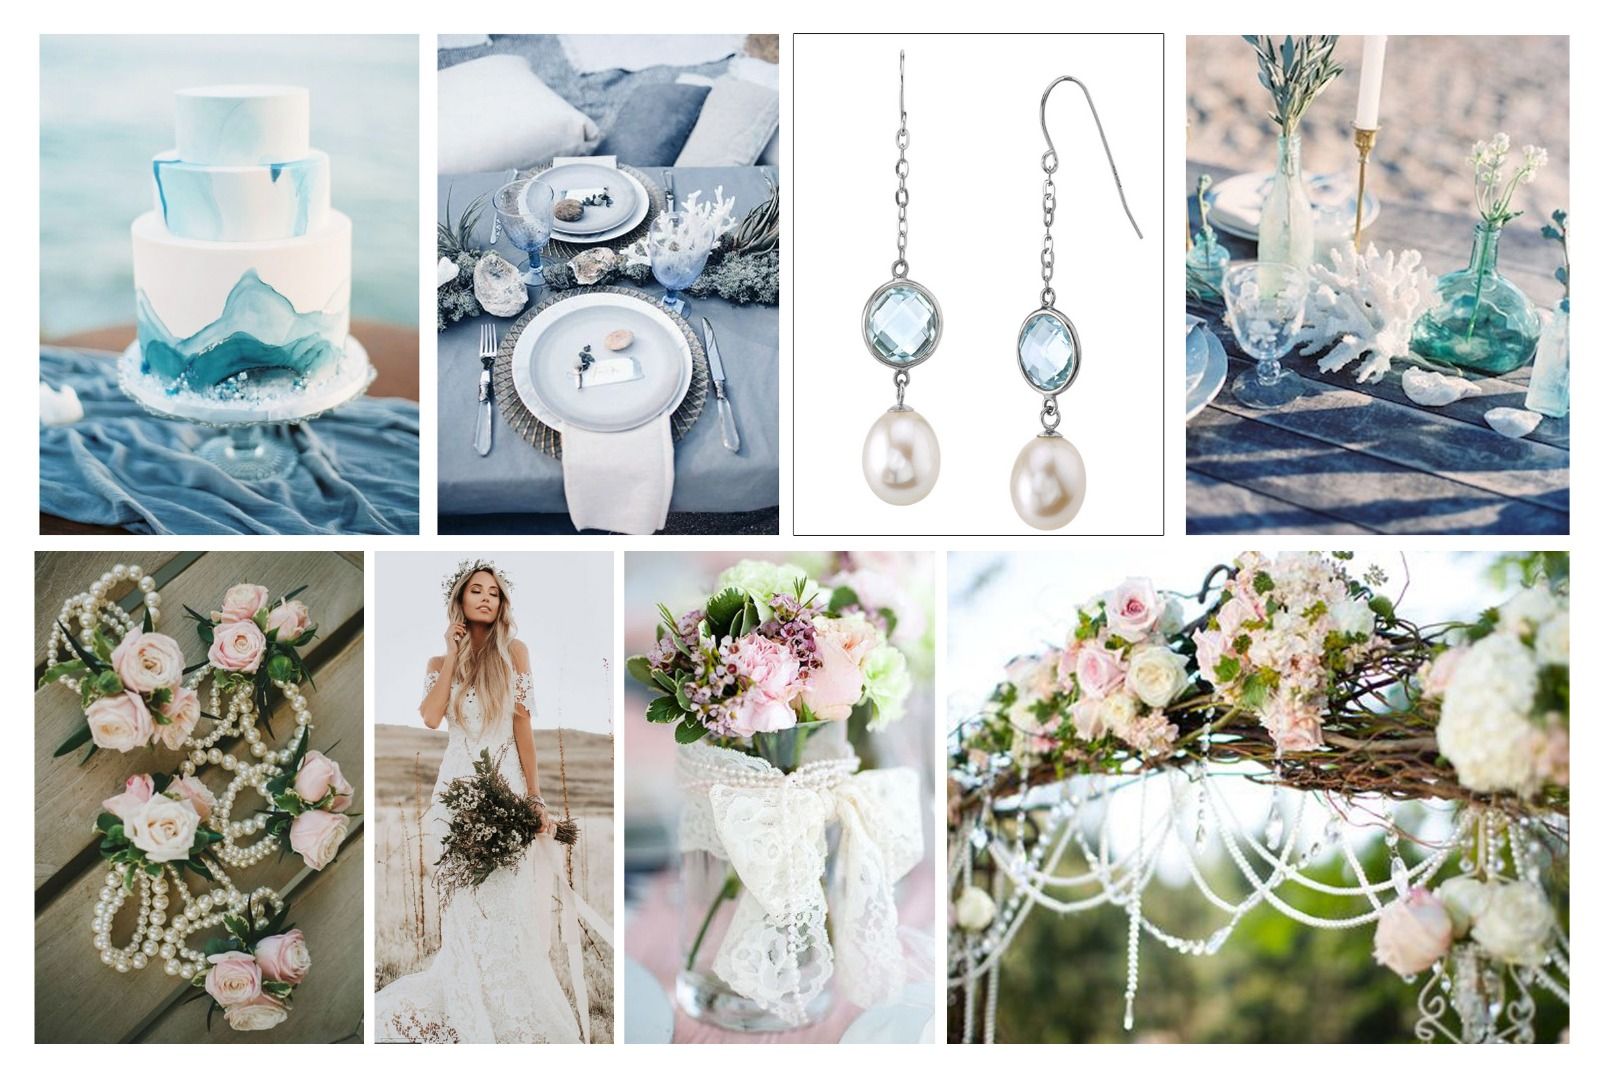 Pearl Bridal Jewelry and Decor for a Stunning Beach Wedding